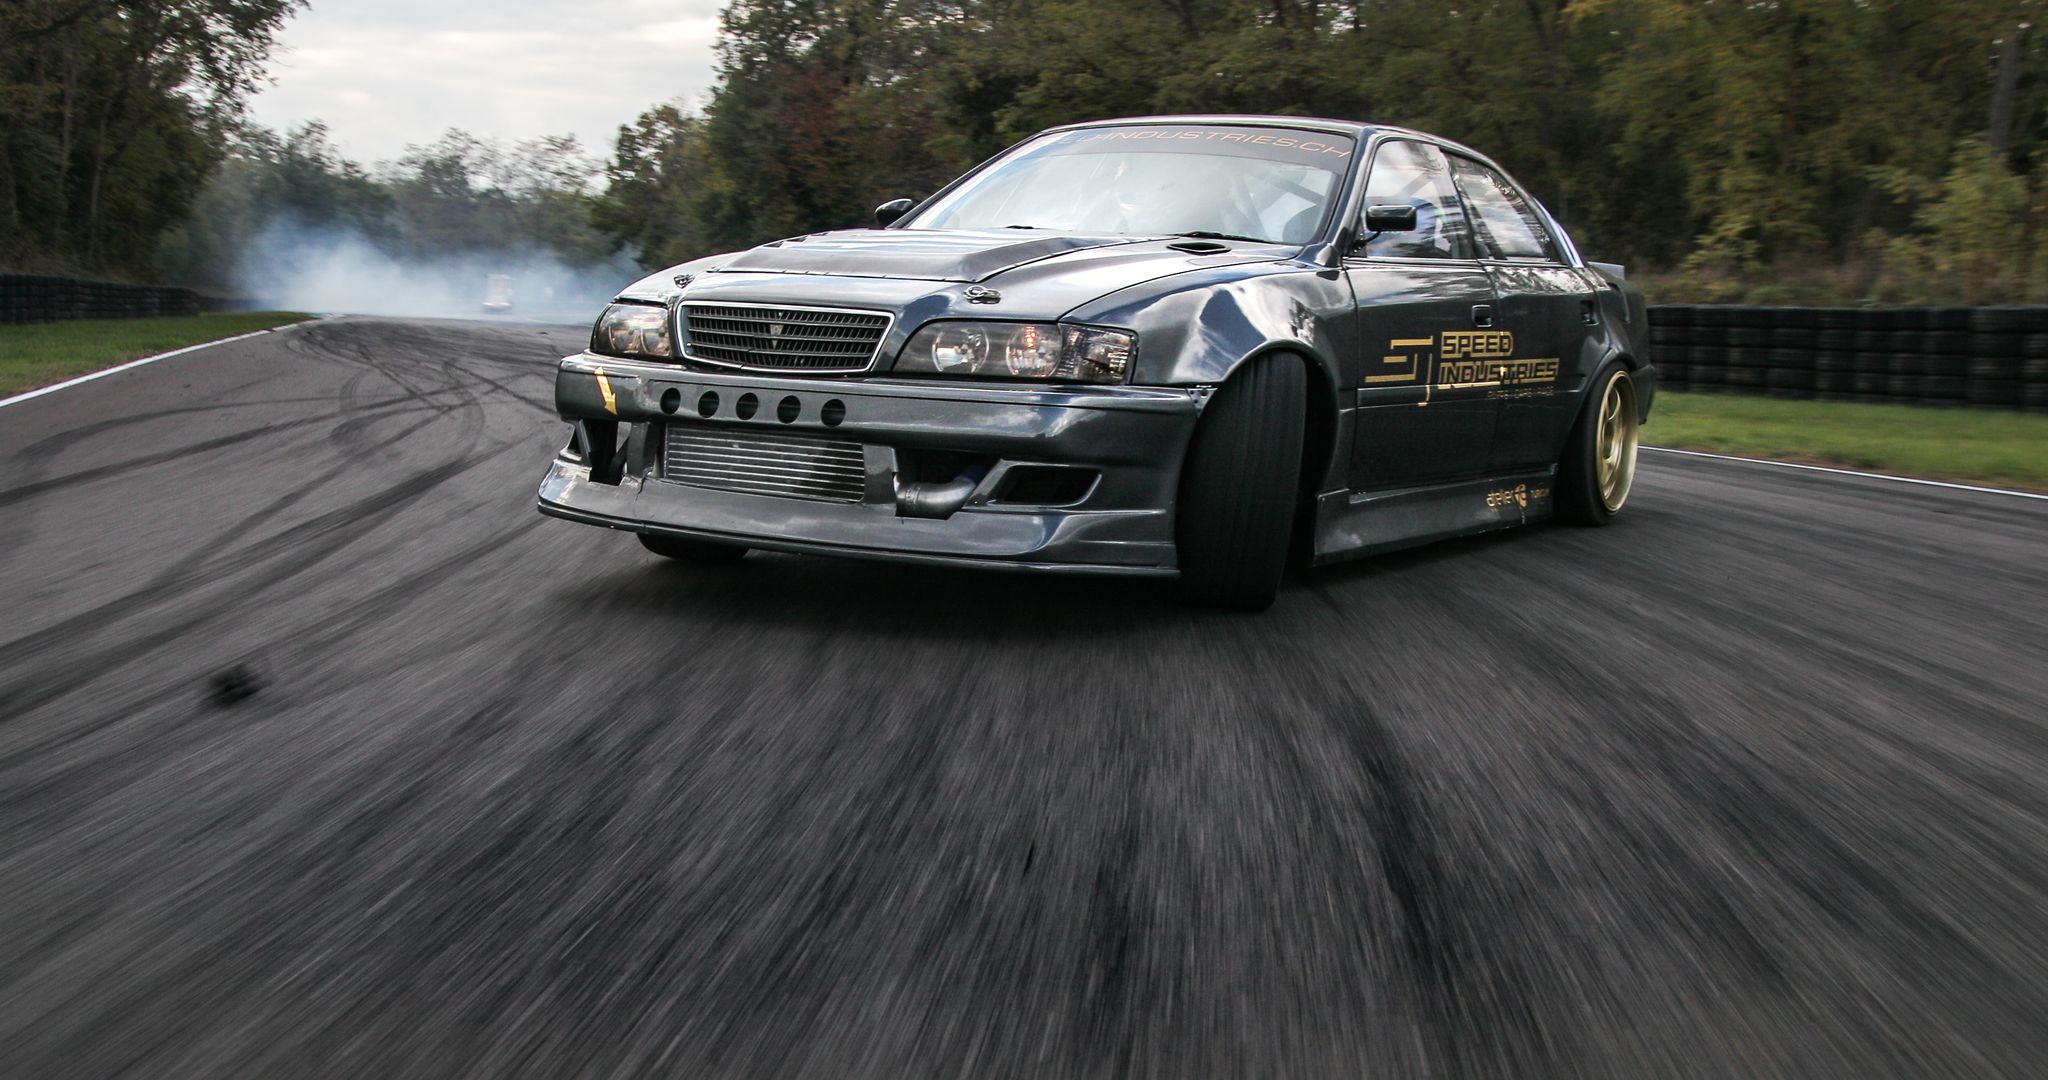 1997 Toyota Chaser JZX100 Is a VIP Drift Machine Can Easily